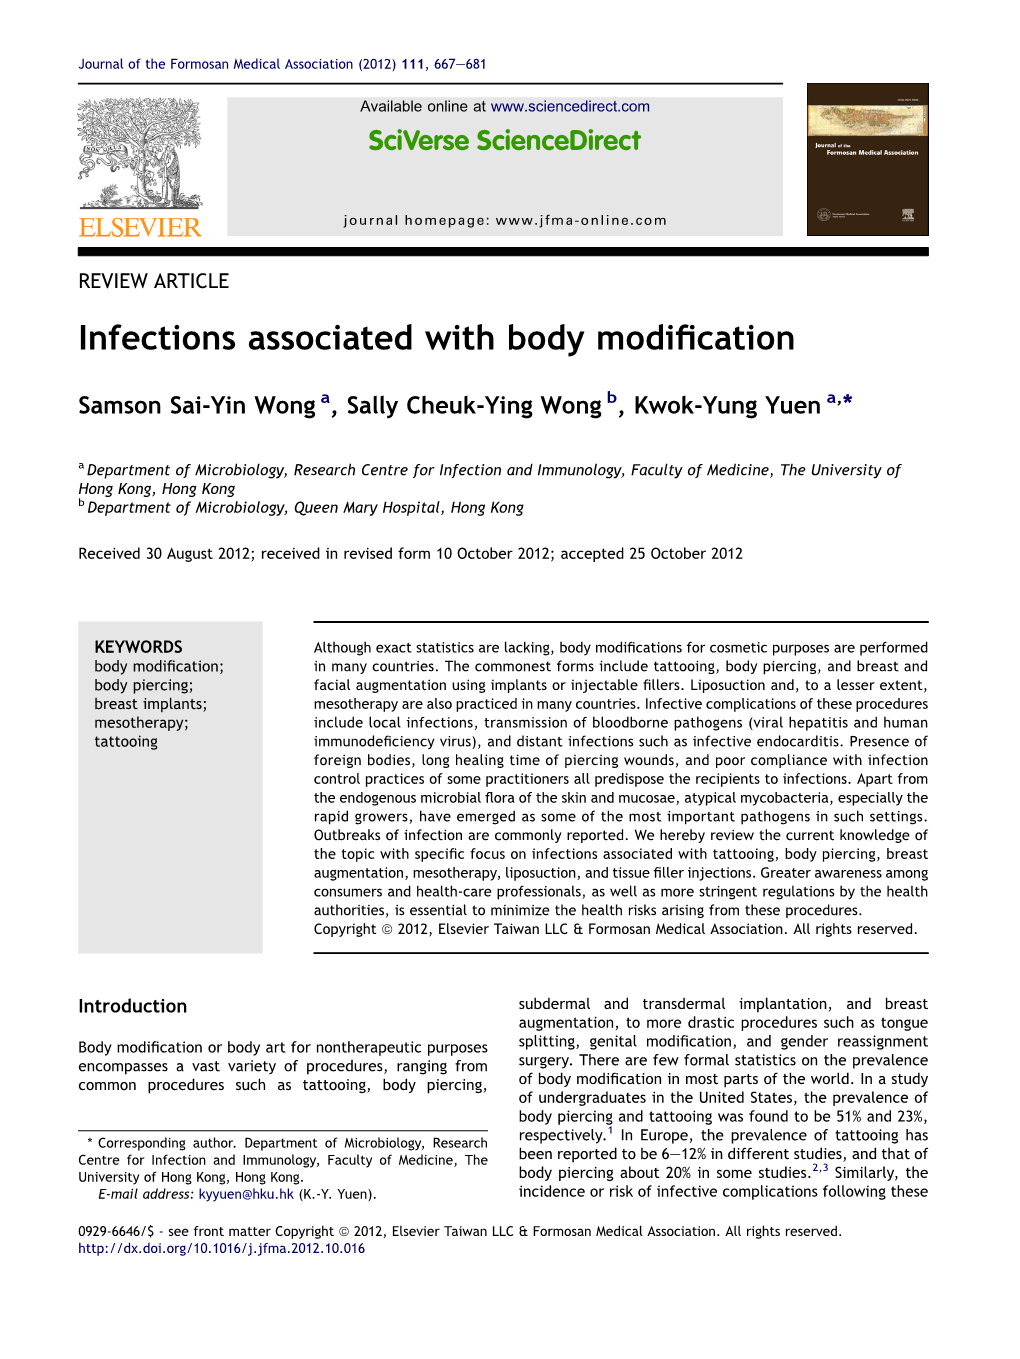 Infections Associated with Body Modification